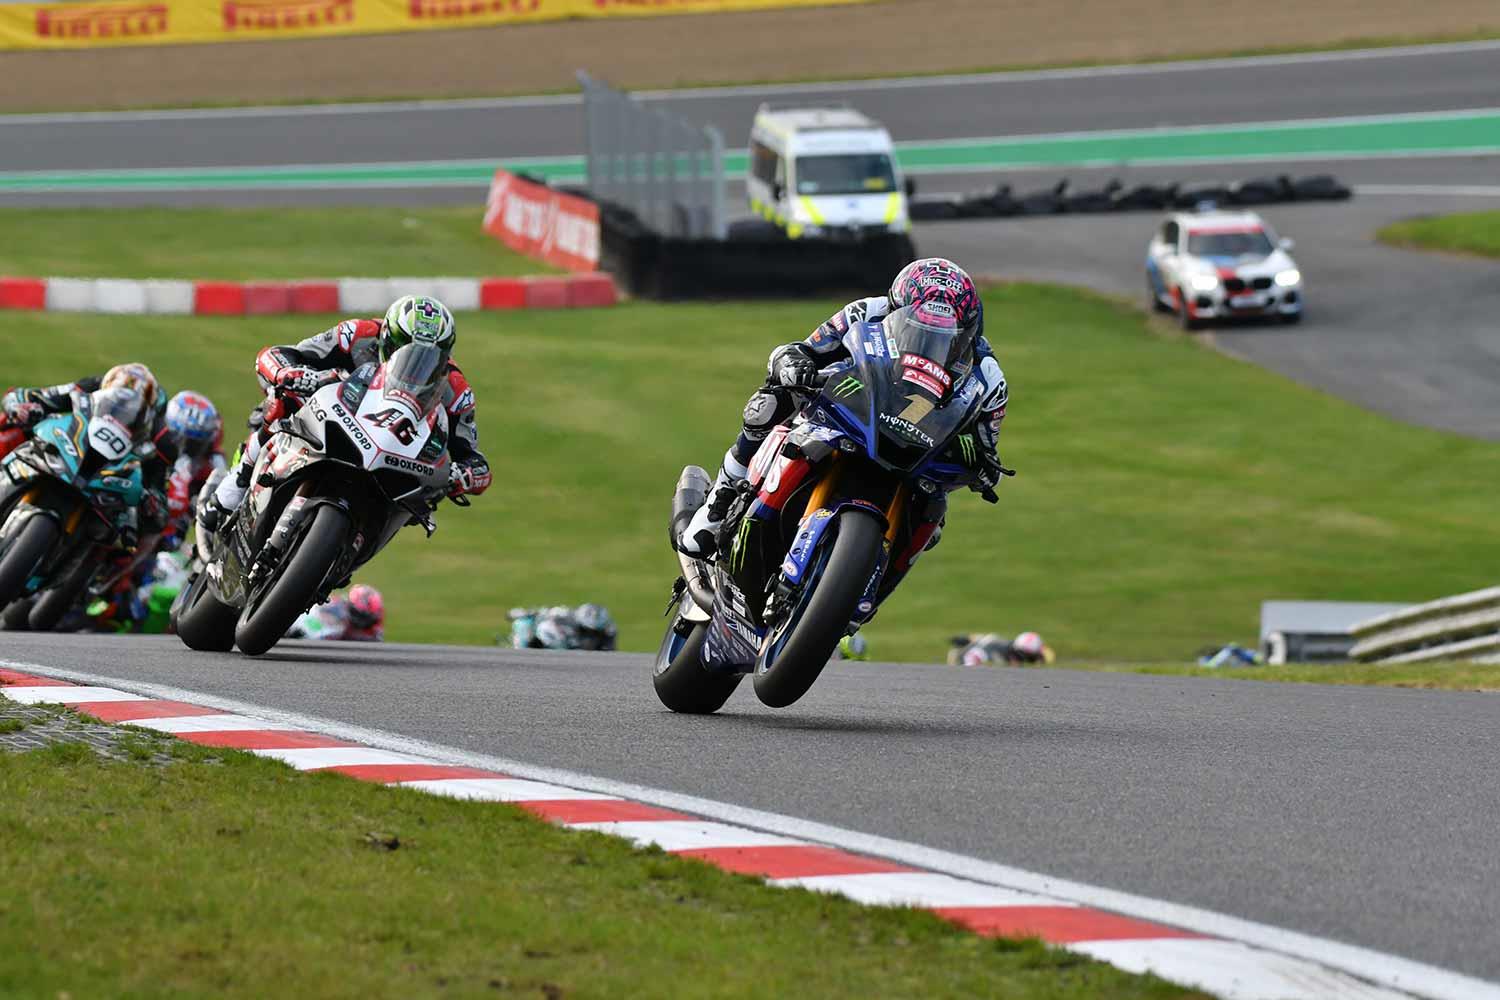 Bsb Tarran Mackenzie Stays With Mcams Yamaha To Defend His Title Mcn